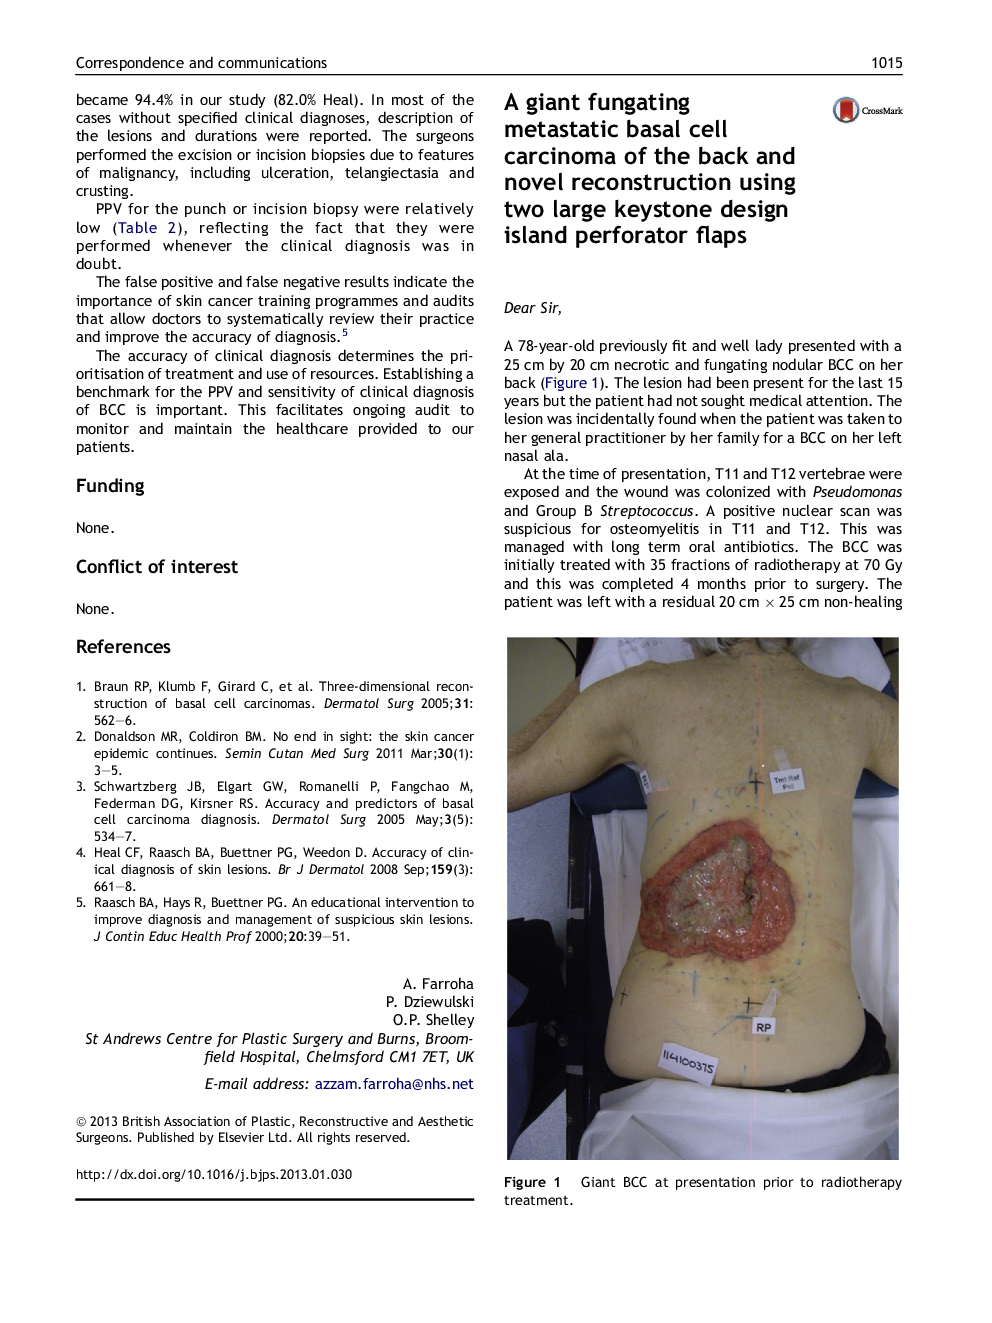 A giant fungating metastatic basal cell carcinoma of the back and novel reconstruction using two large keystone design island perforator flaps